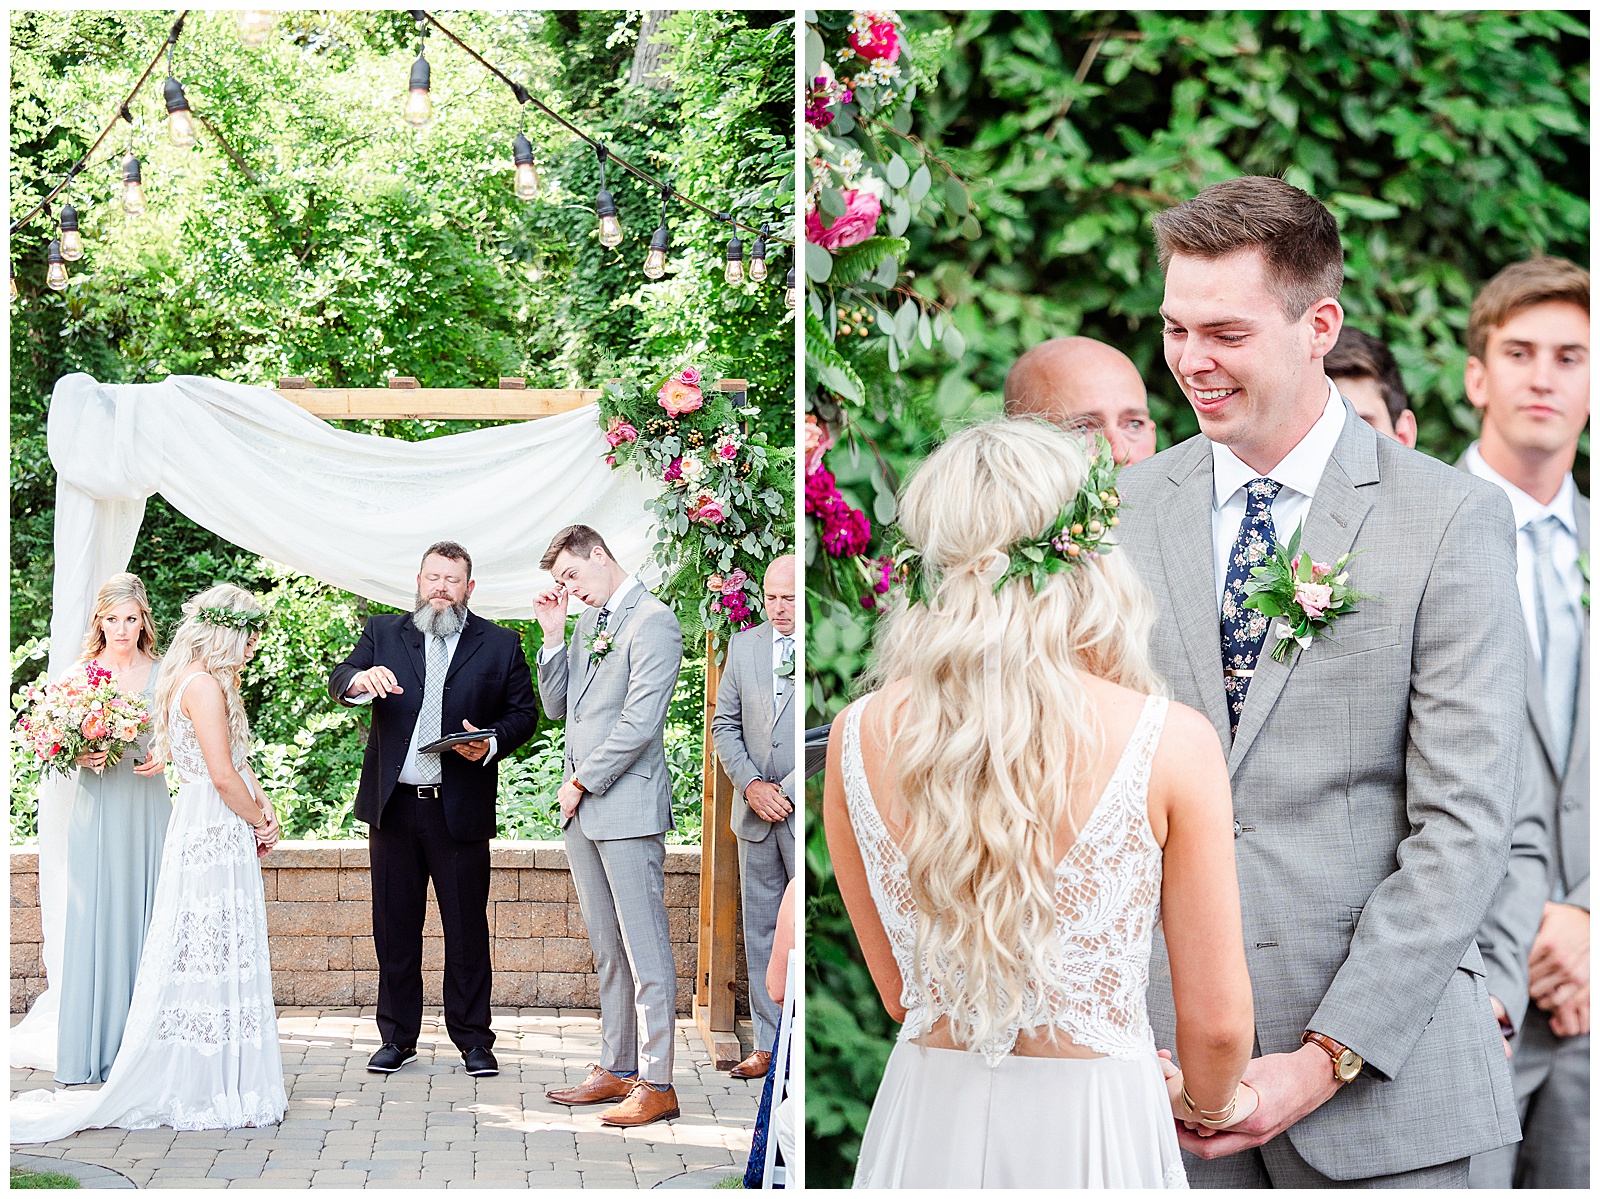 Emotional Bohemian Bride Ceremony from Boho Chic Summer Wedding in Charlotte, NC | check out the full wedding at KevynDixonPhoto.com